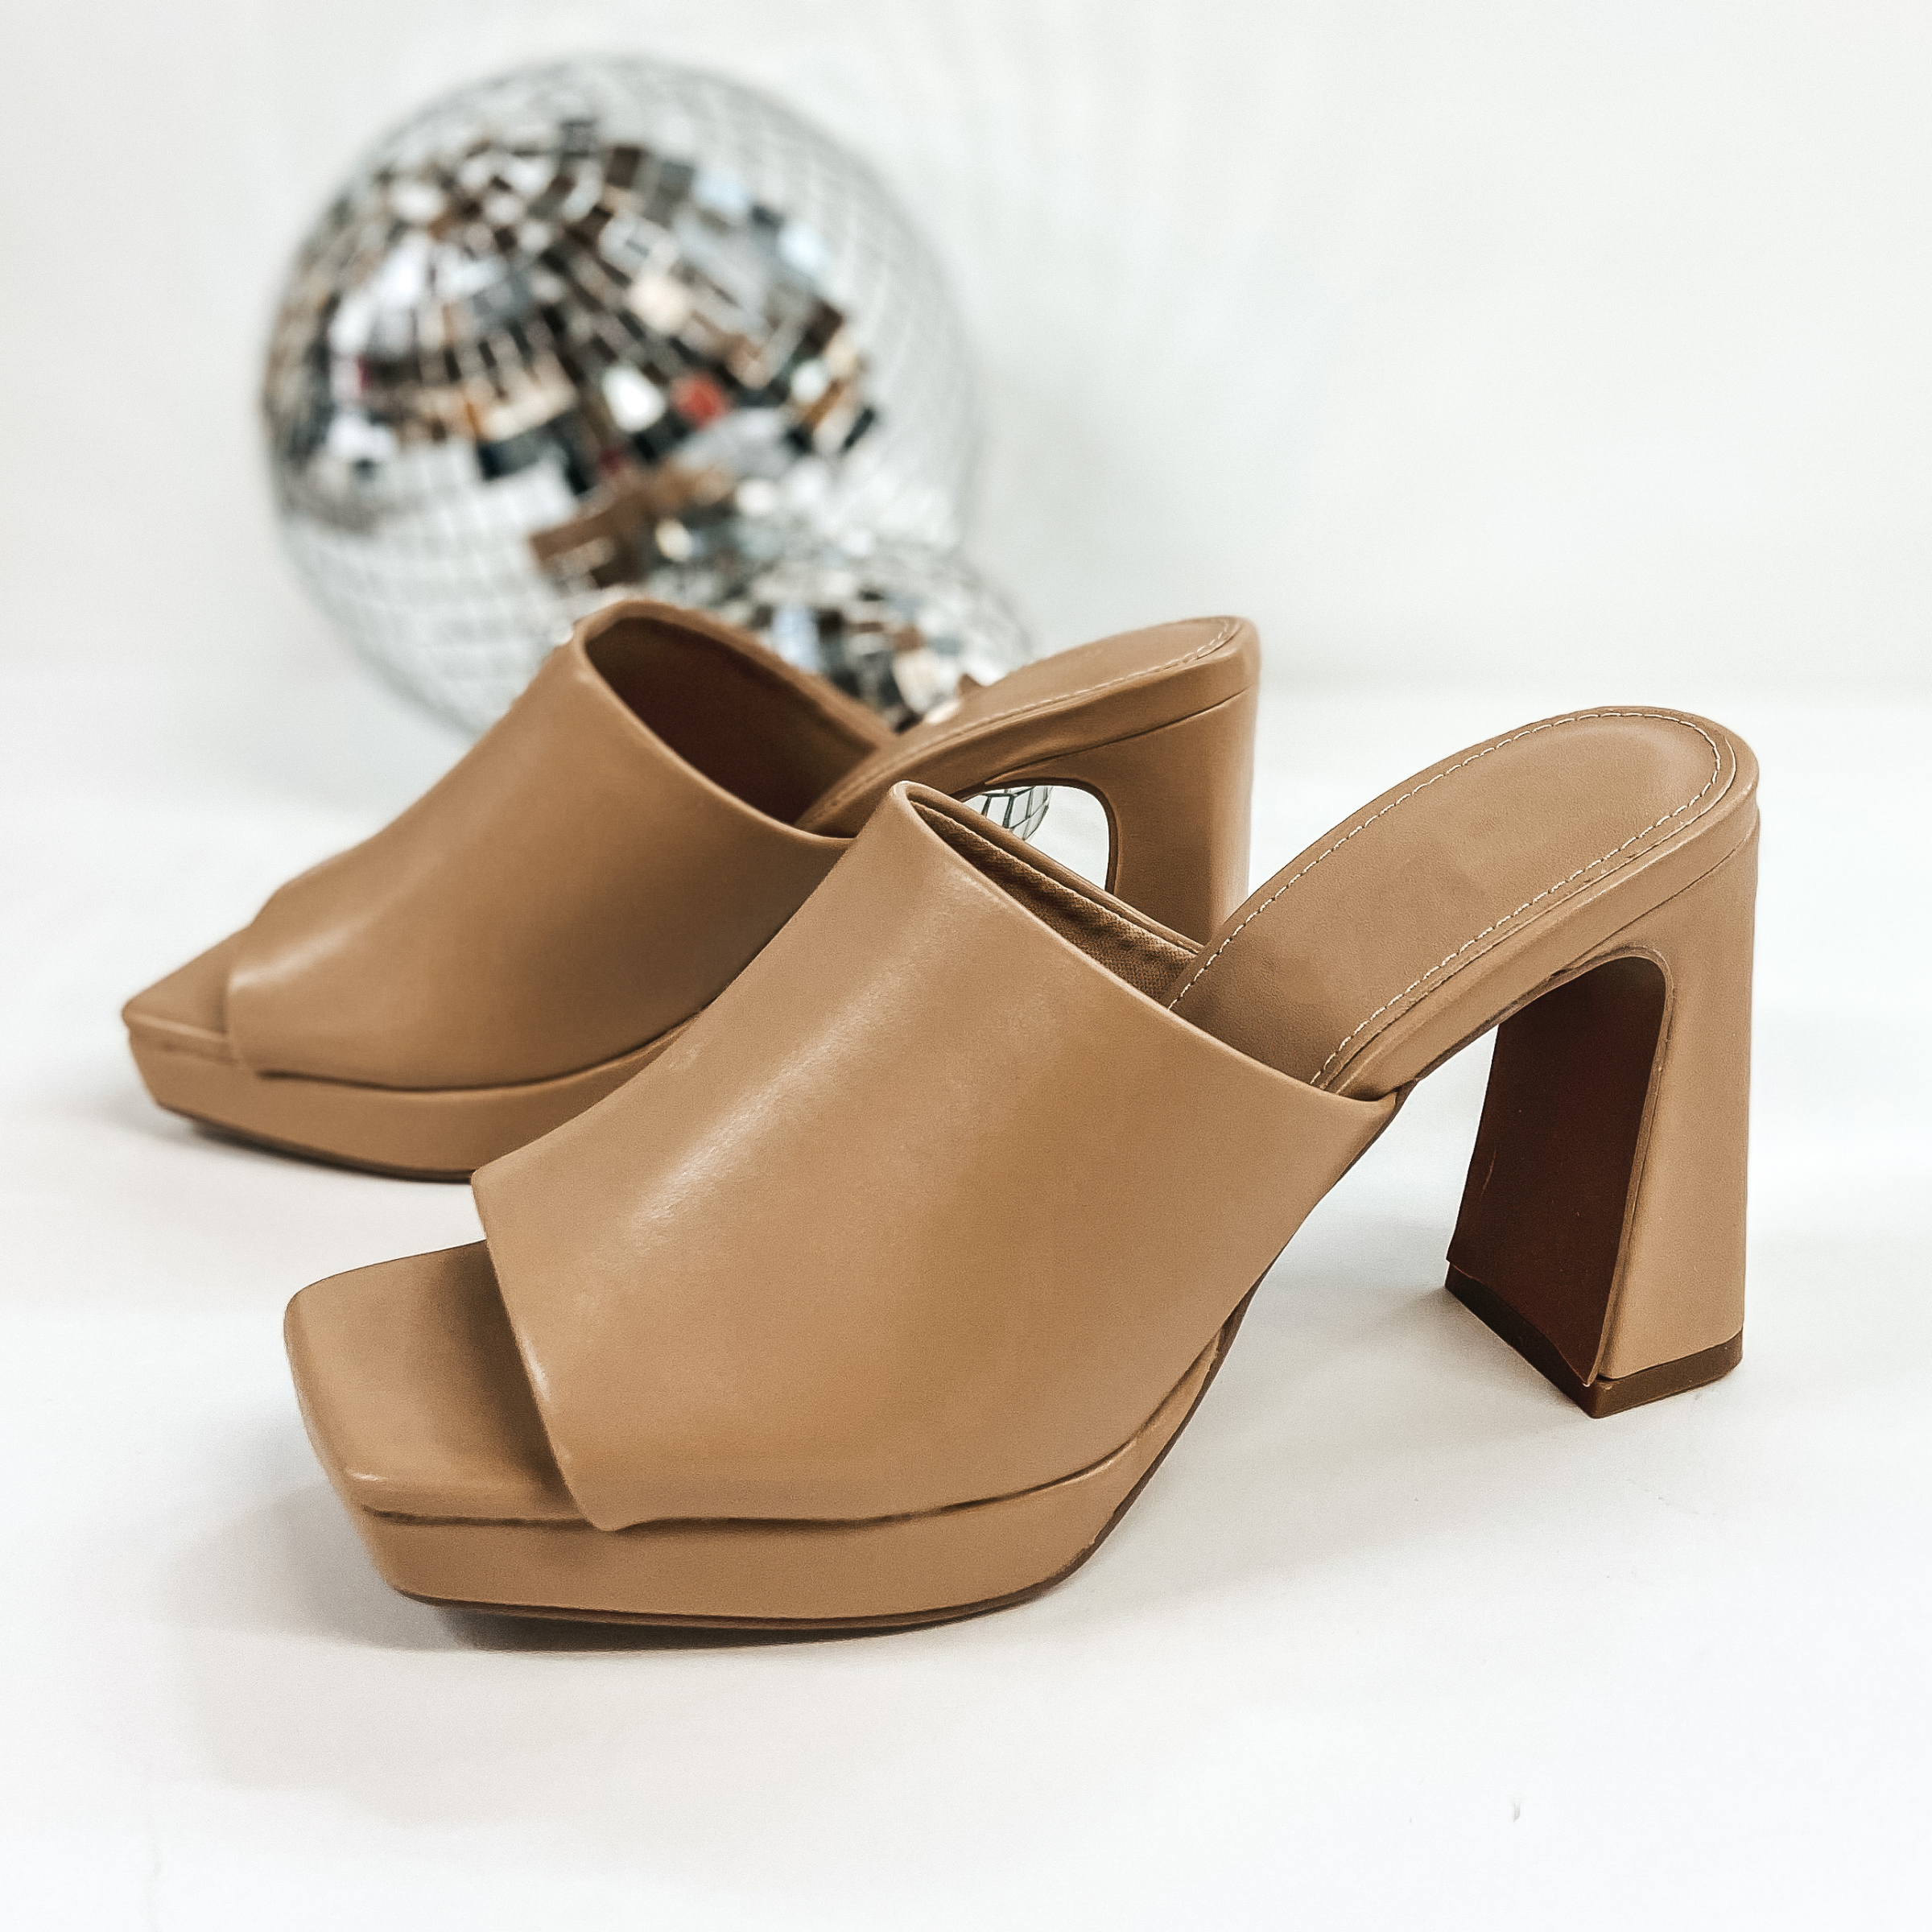 A pair of platform shoes with a slip on upper and open toe. These shoes have a high block heel. The tan heels are pictured on white background with disco balls.